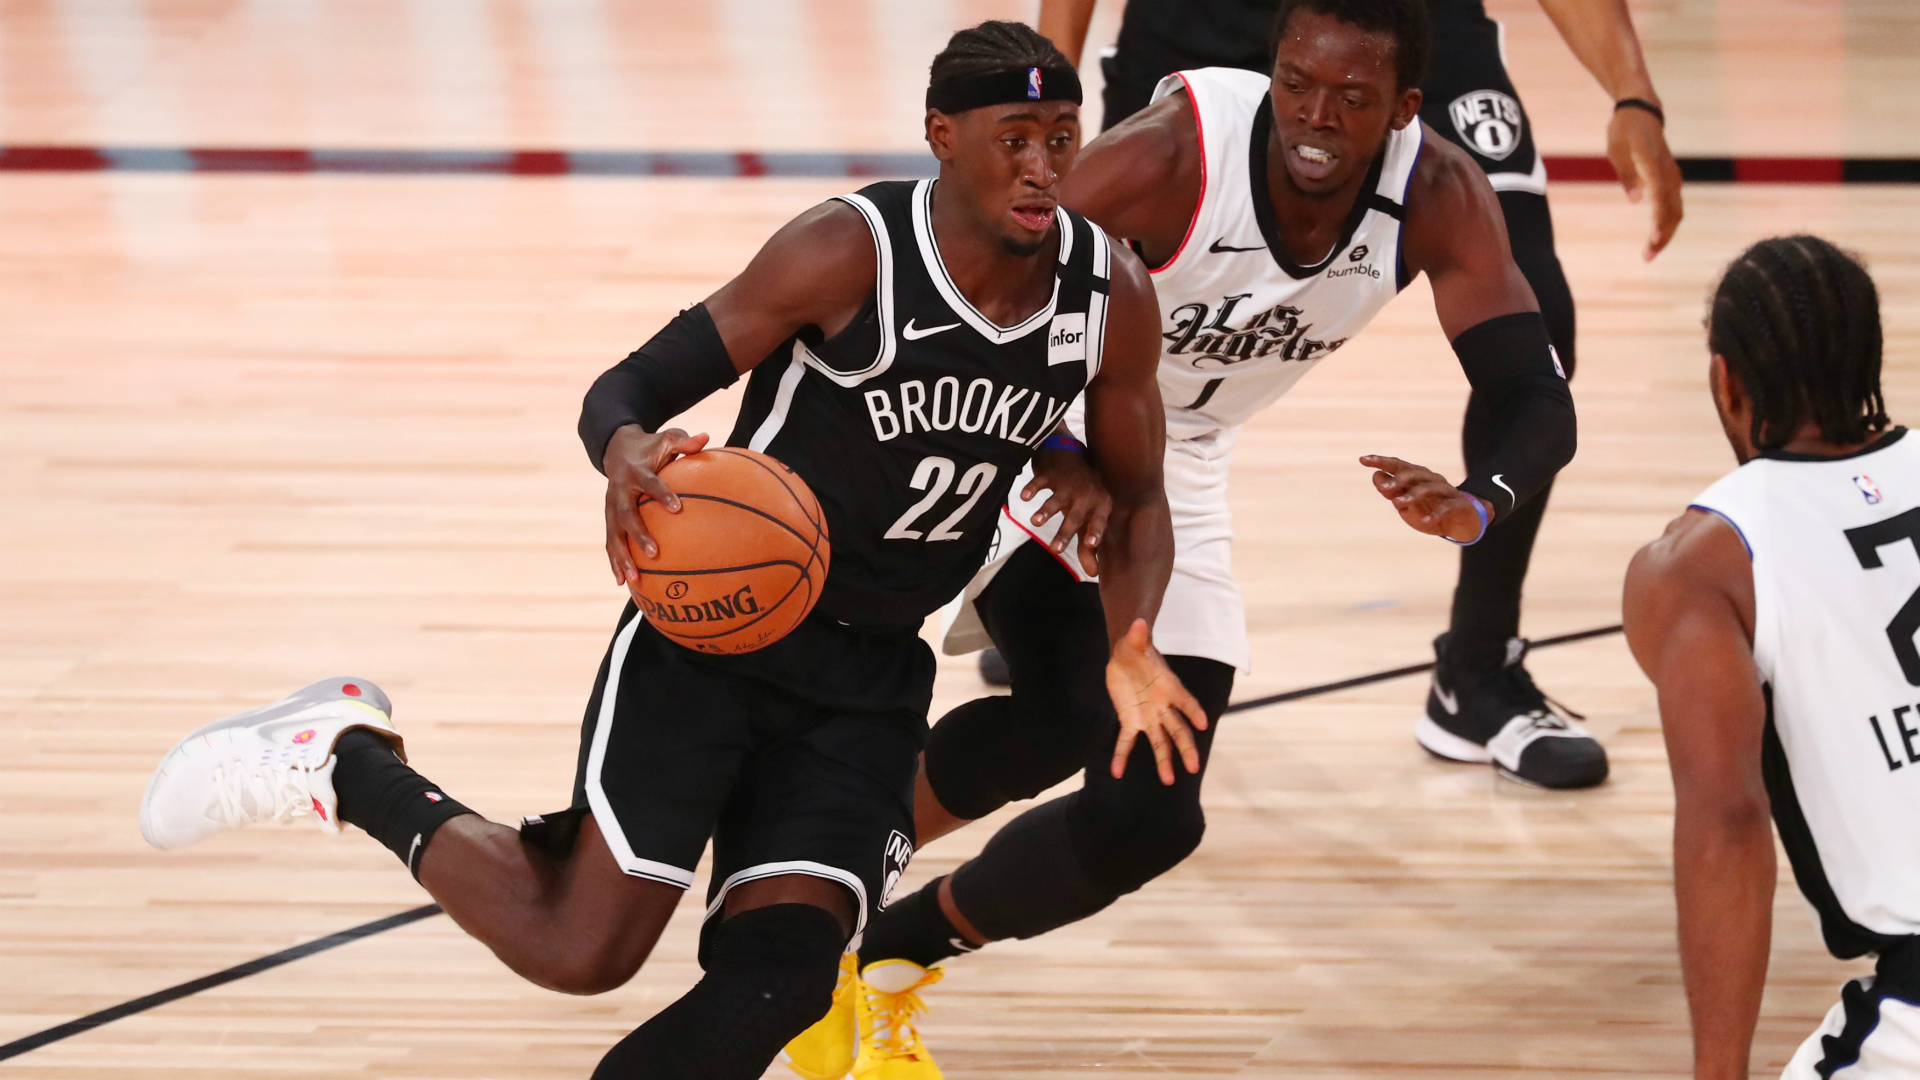 The Brooklyn Nets beat the Los Angeles Clippers to secure the east's seventh seed, while Damian Lillard inspired the Portland Trail Blazers.